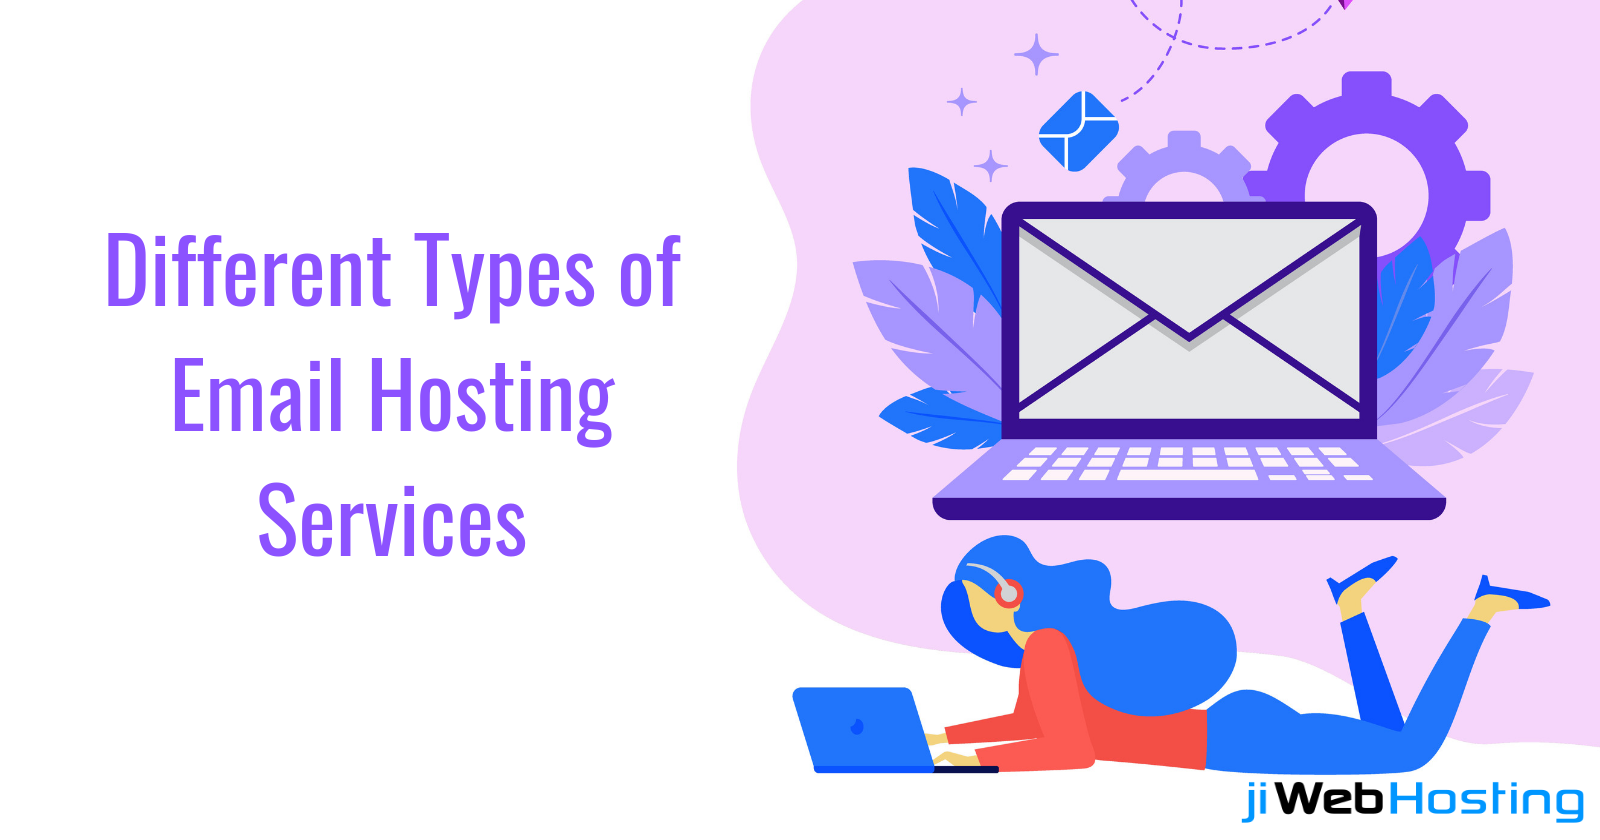 Different Types of Email Hosting Services